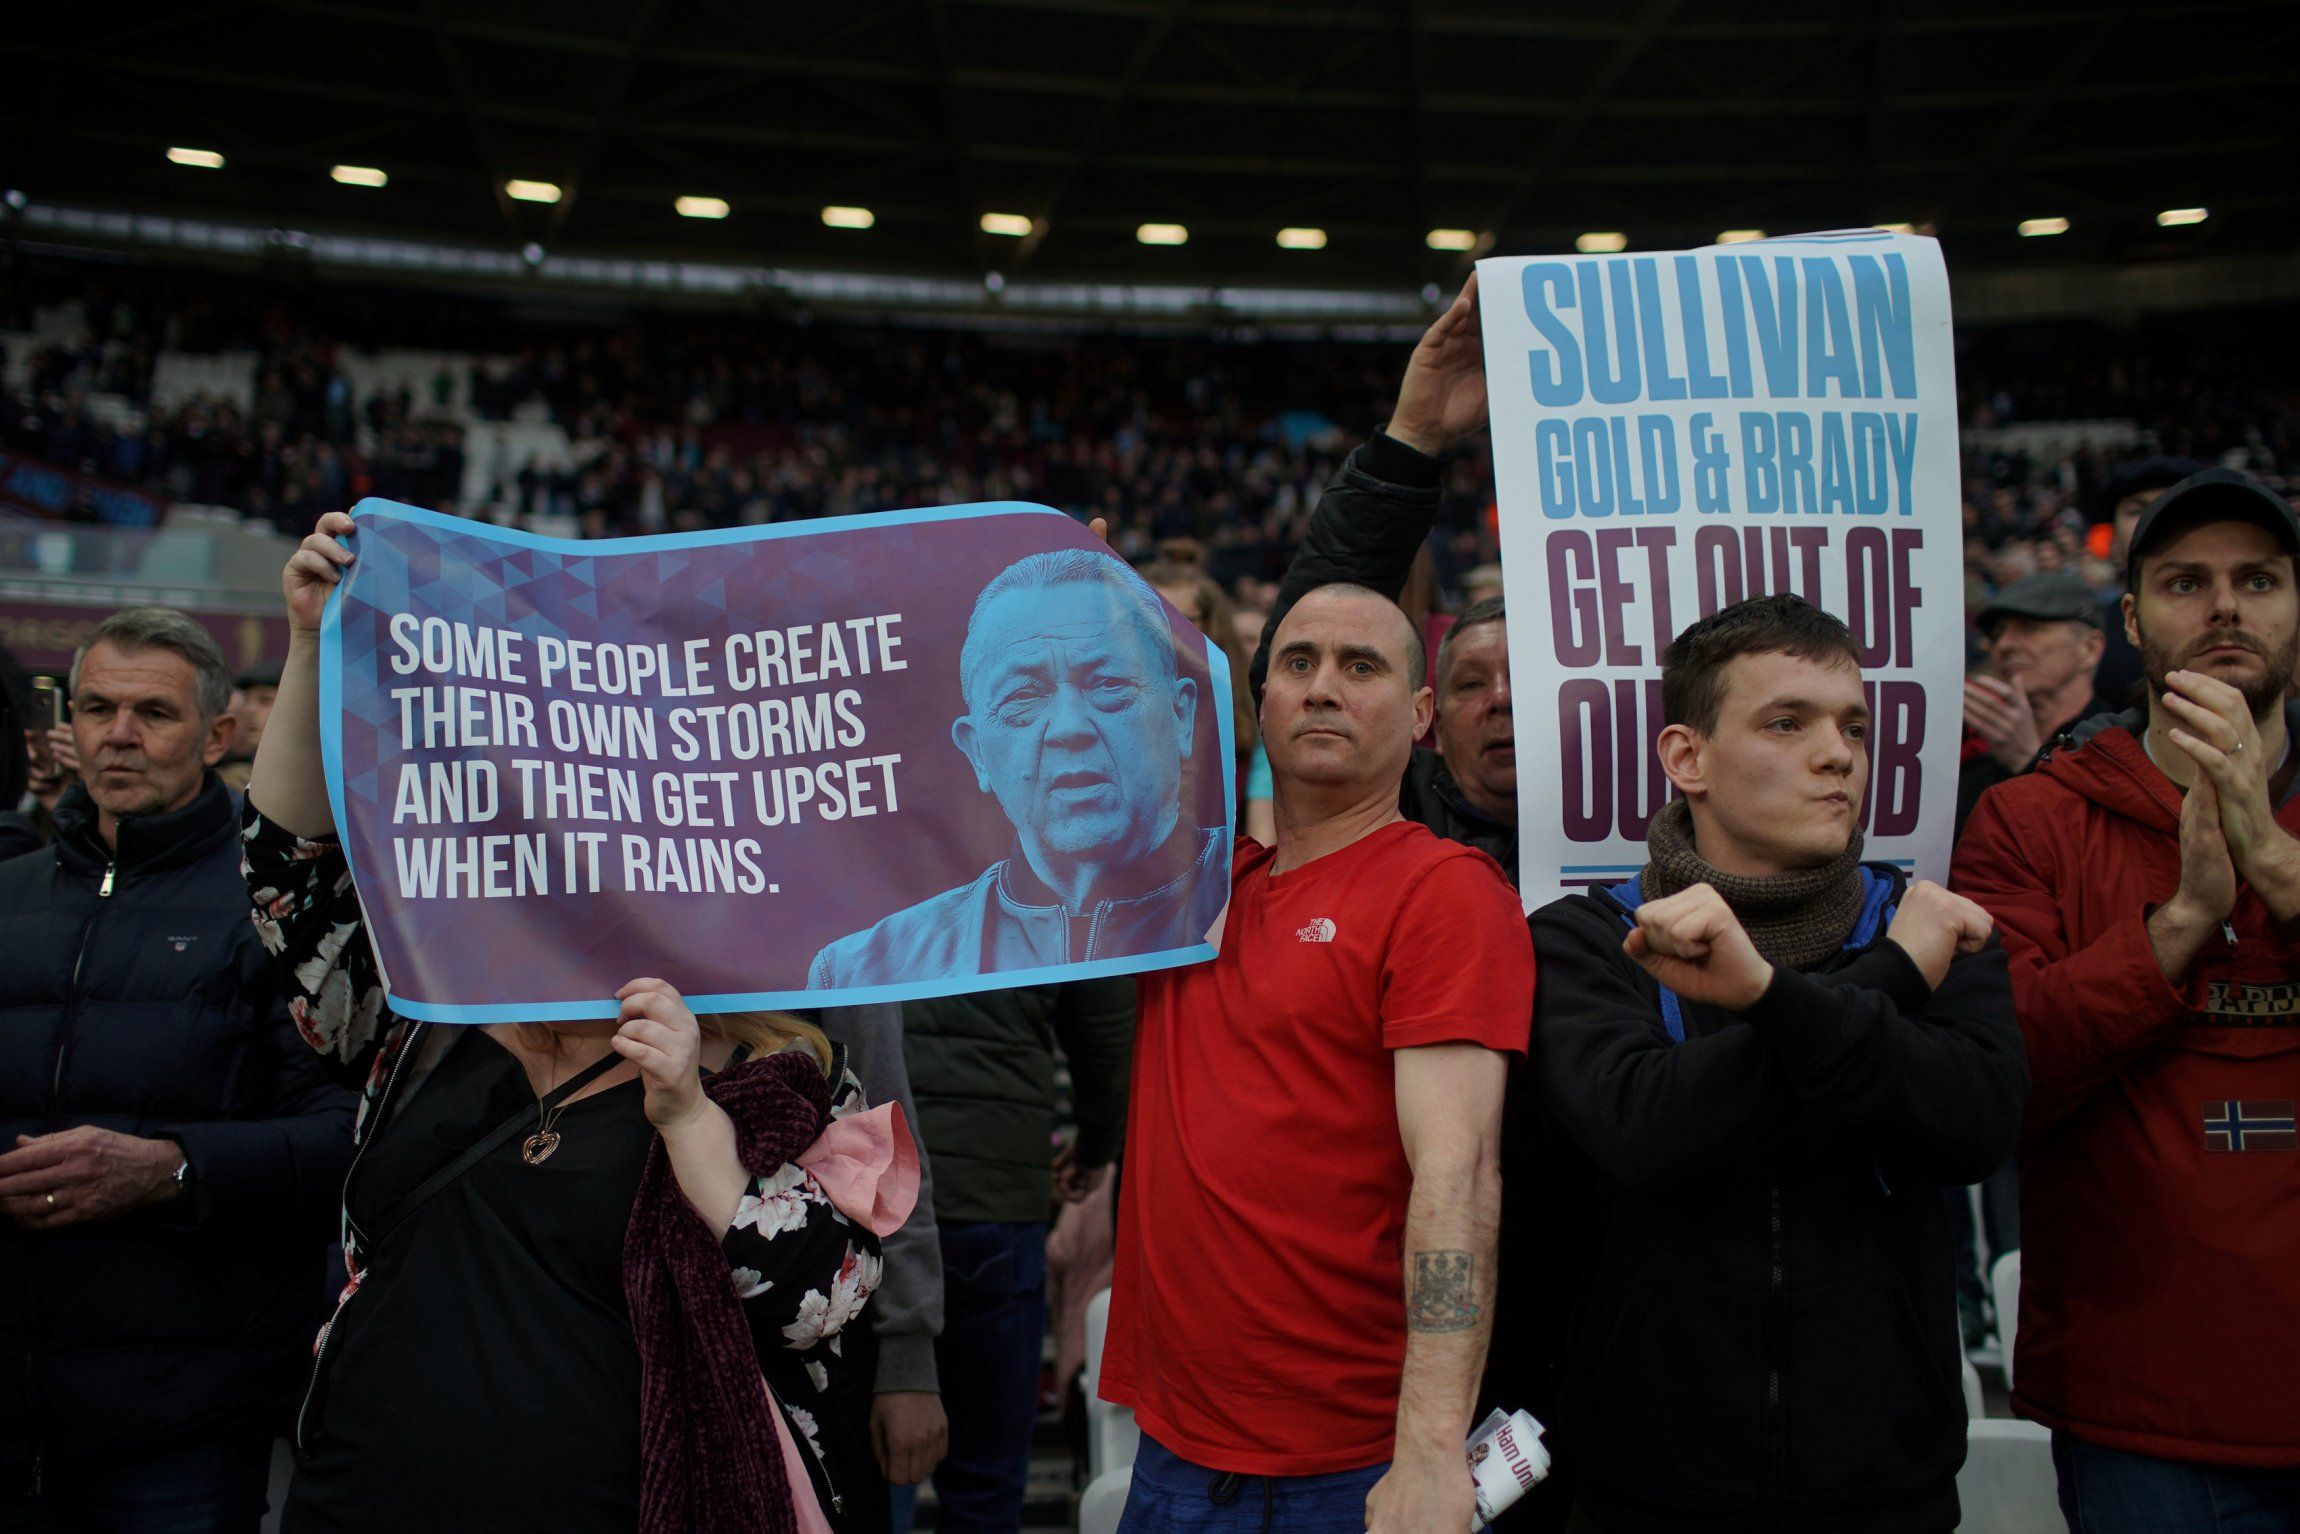 West Ham fans protesting against Gold and Sullivan